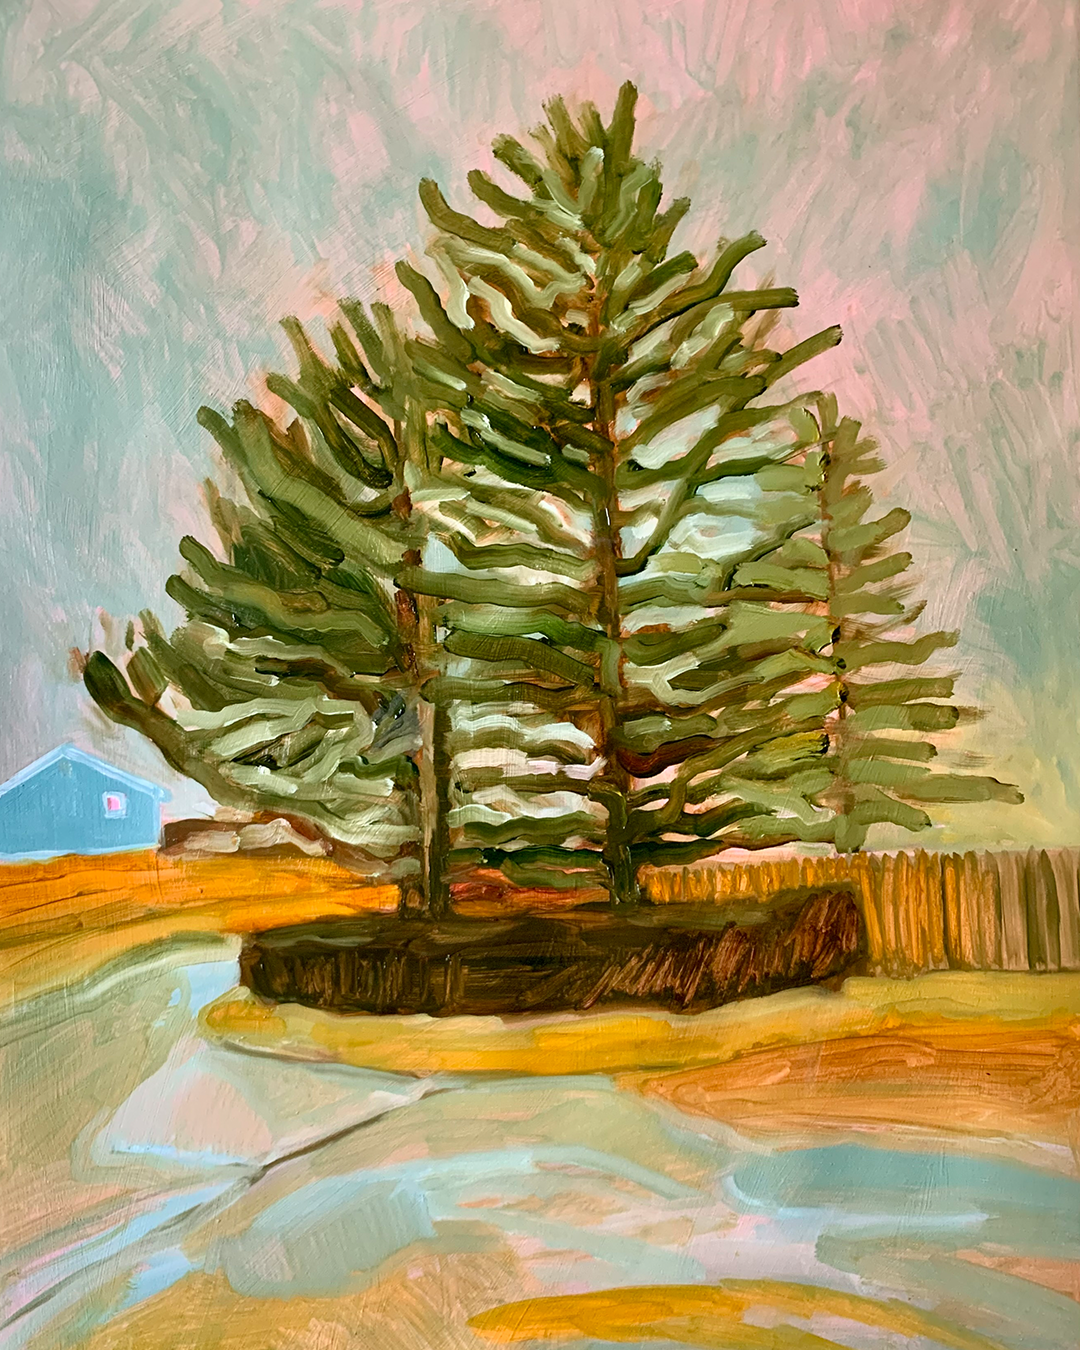 An illustration of pine trees close together